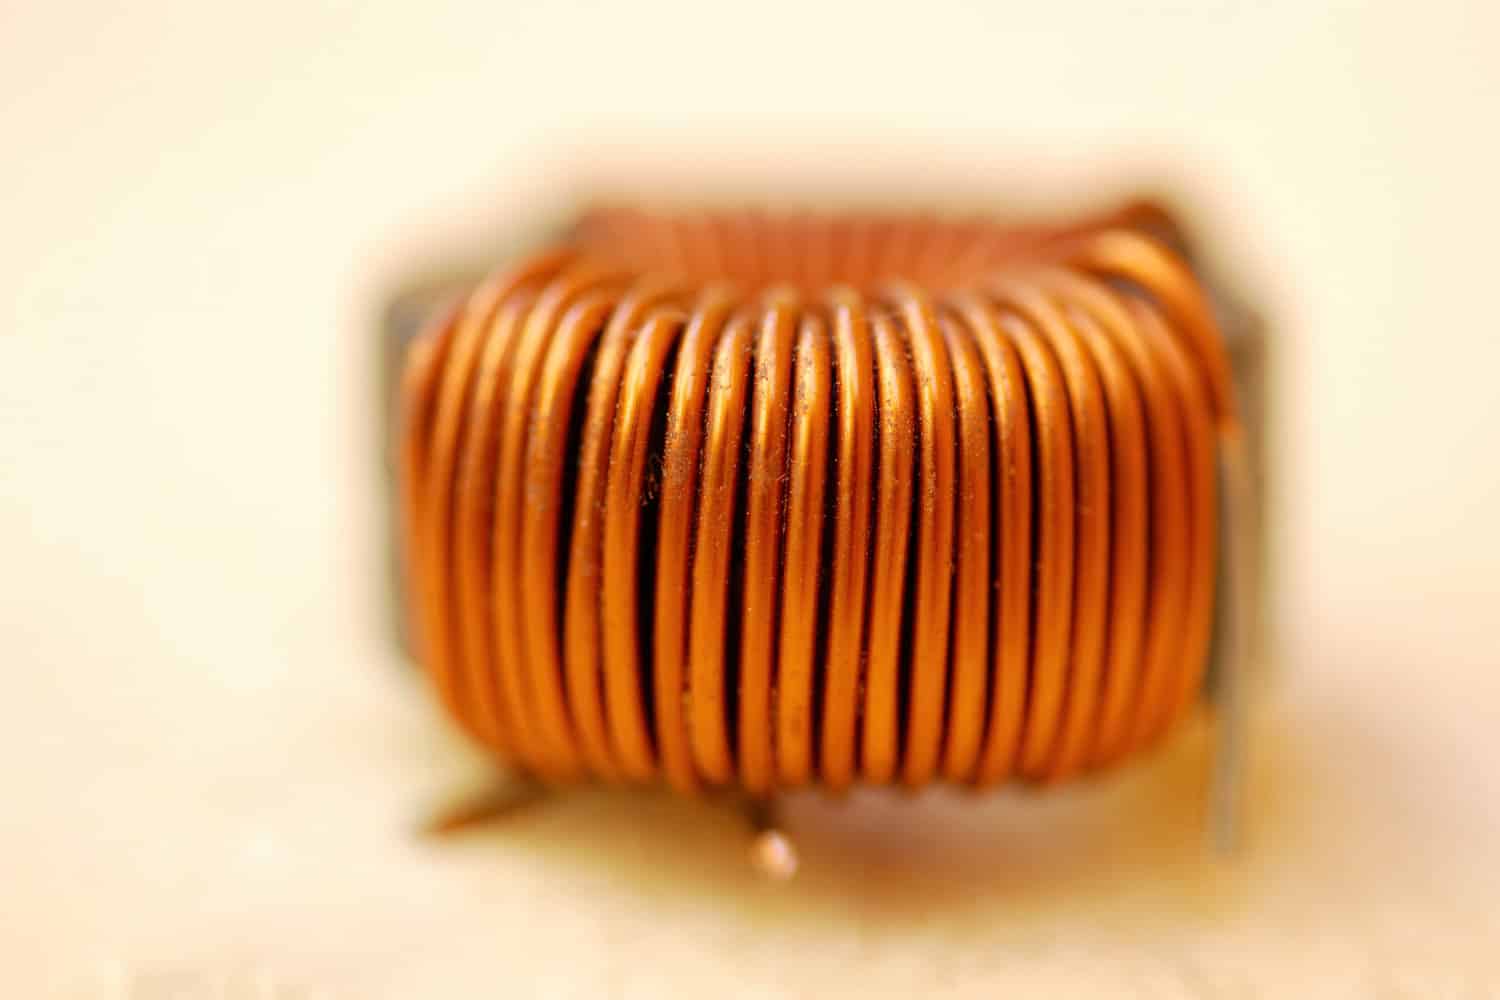 An insulated copper coil, inductive component that stores energy as a magnetic field by induction